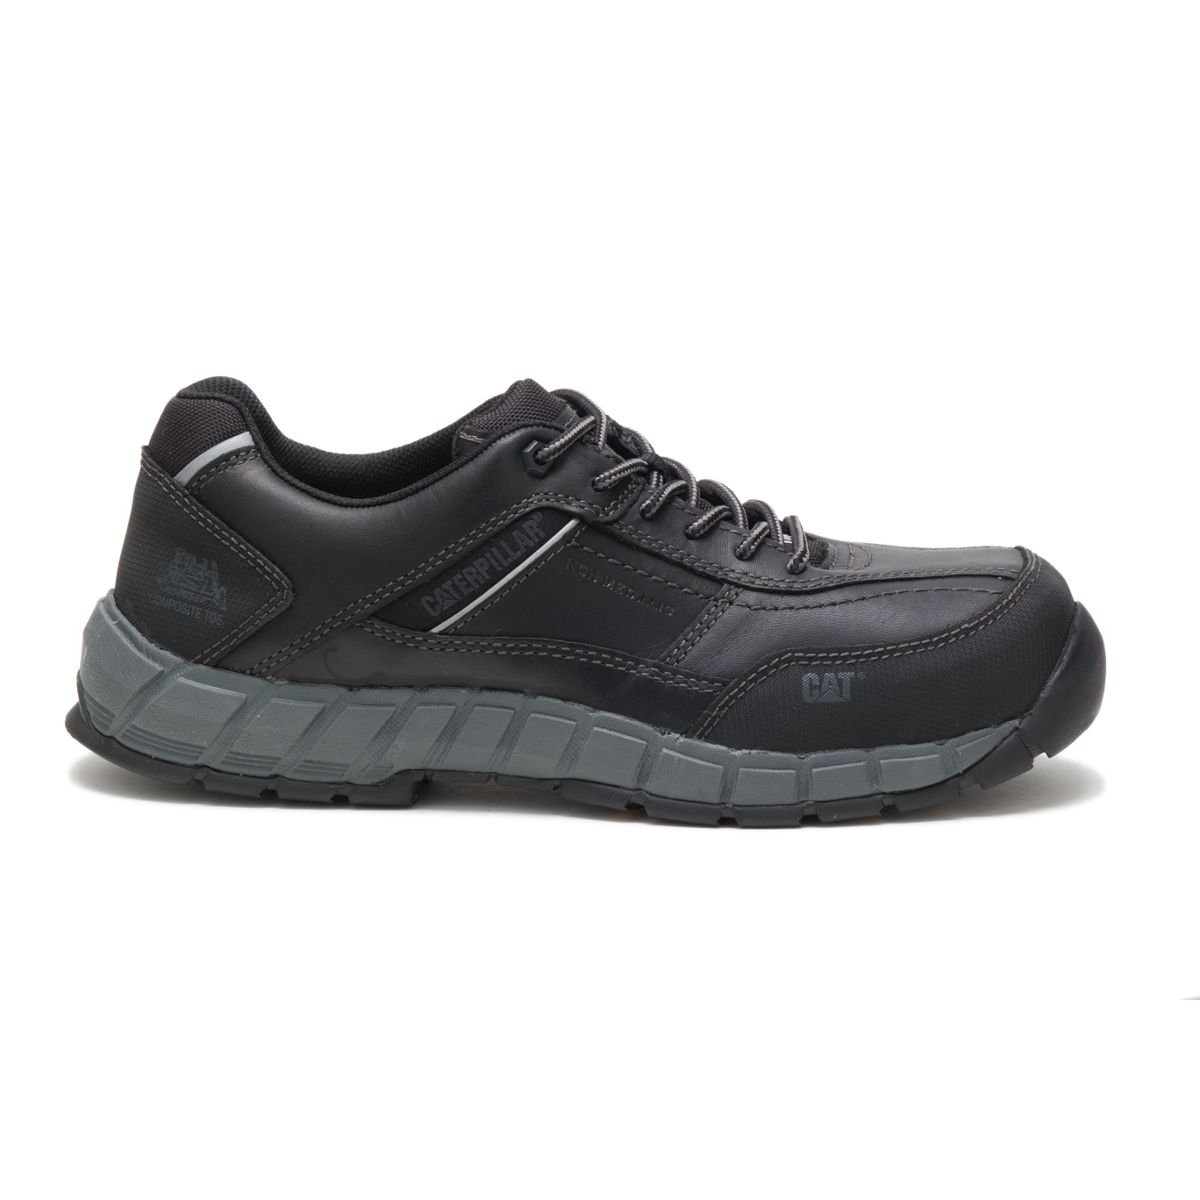 black leather work shoes mens